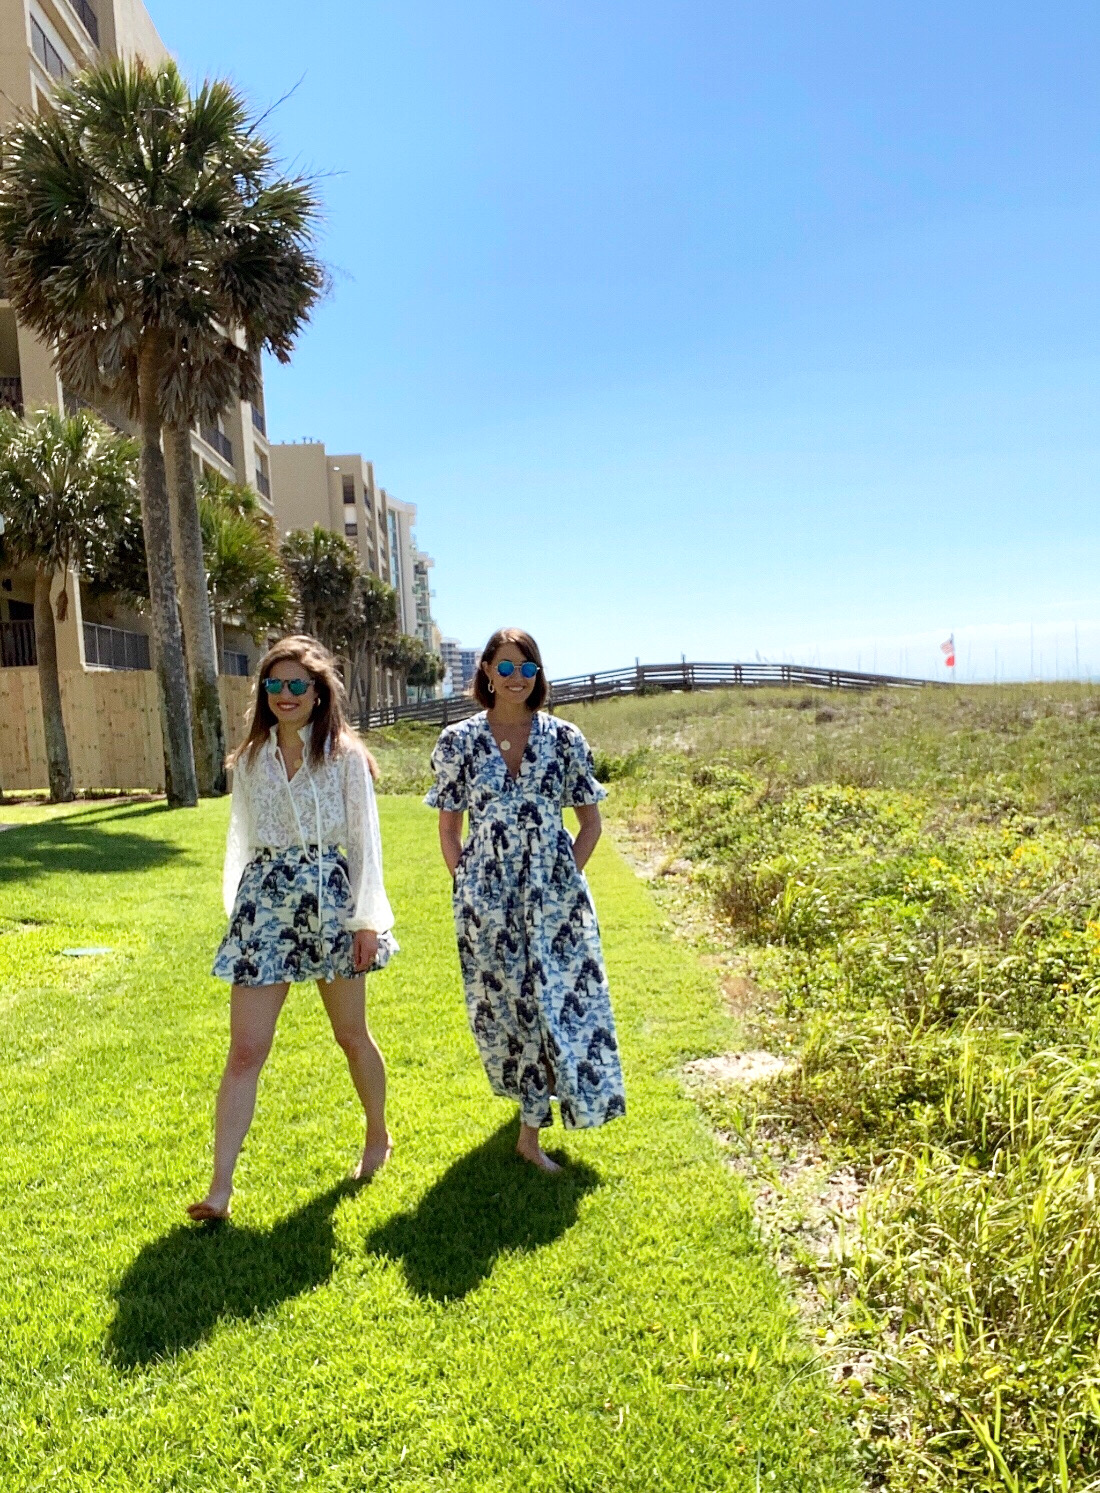 two women walking in the grass at the beach, both have brown hair and are wearing sunglasses. One wears a white top tucked into a short blue printed skirt and the other wears a blue and white printed dress. both are barefoot